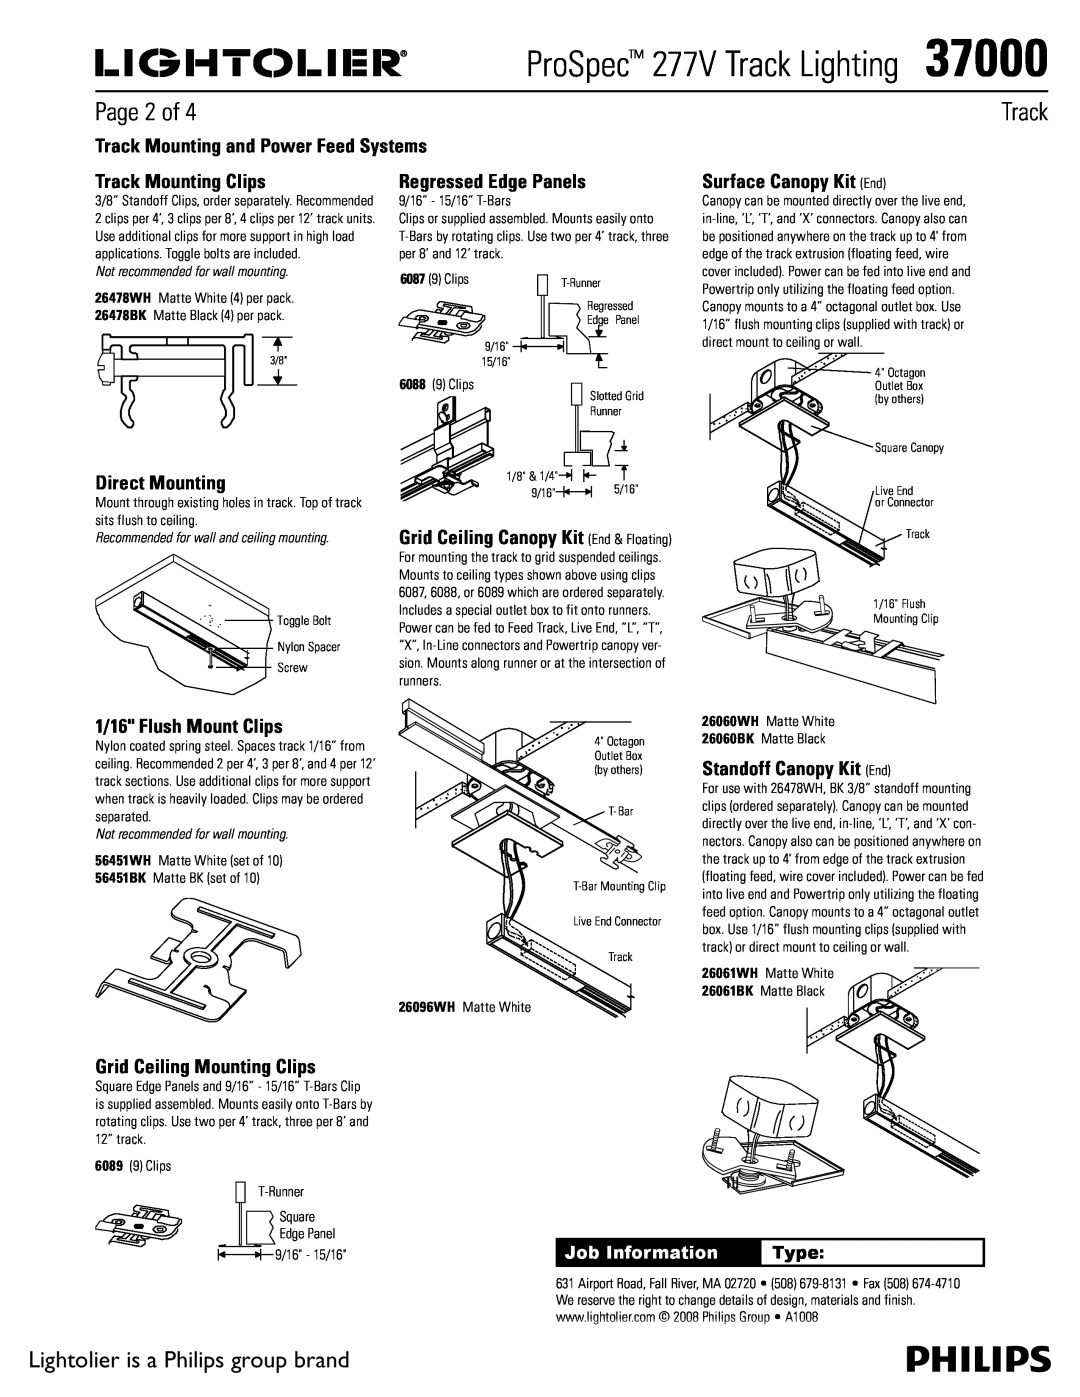 Lightolier 37000 manual Page 2 of, Track Mounting and Power Feed Systems, Track Mounting Clips, Regressed Edge Panels, Type 